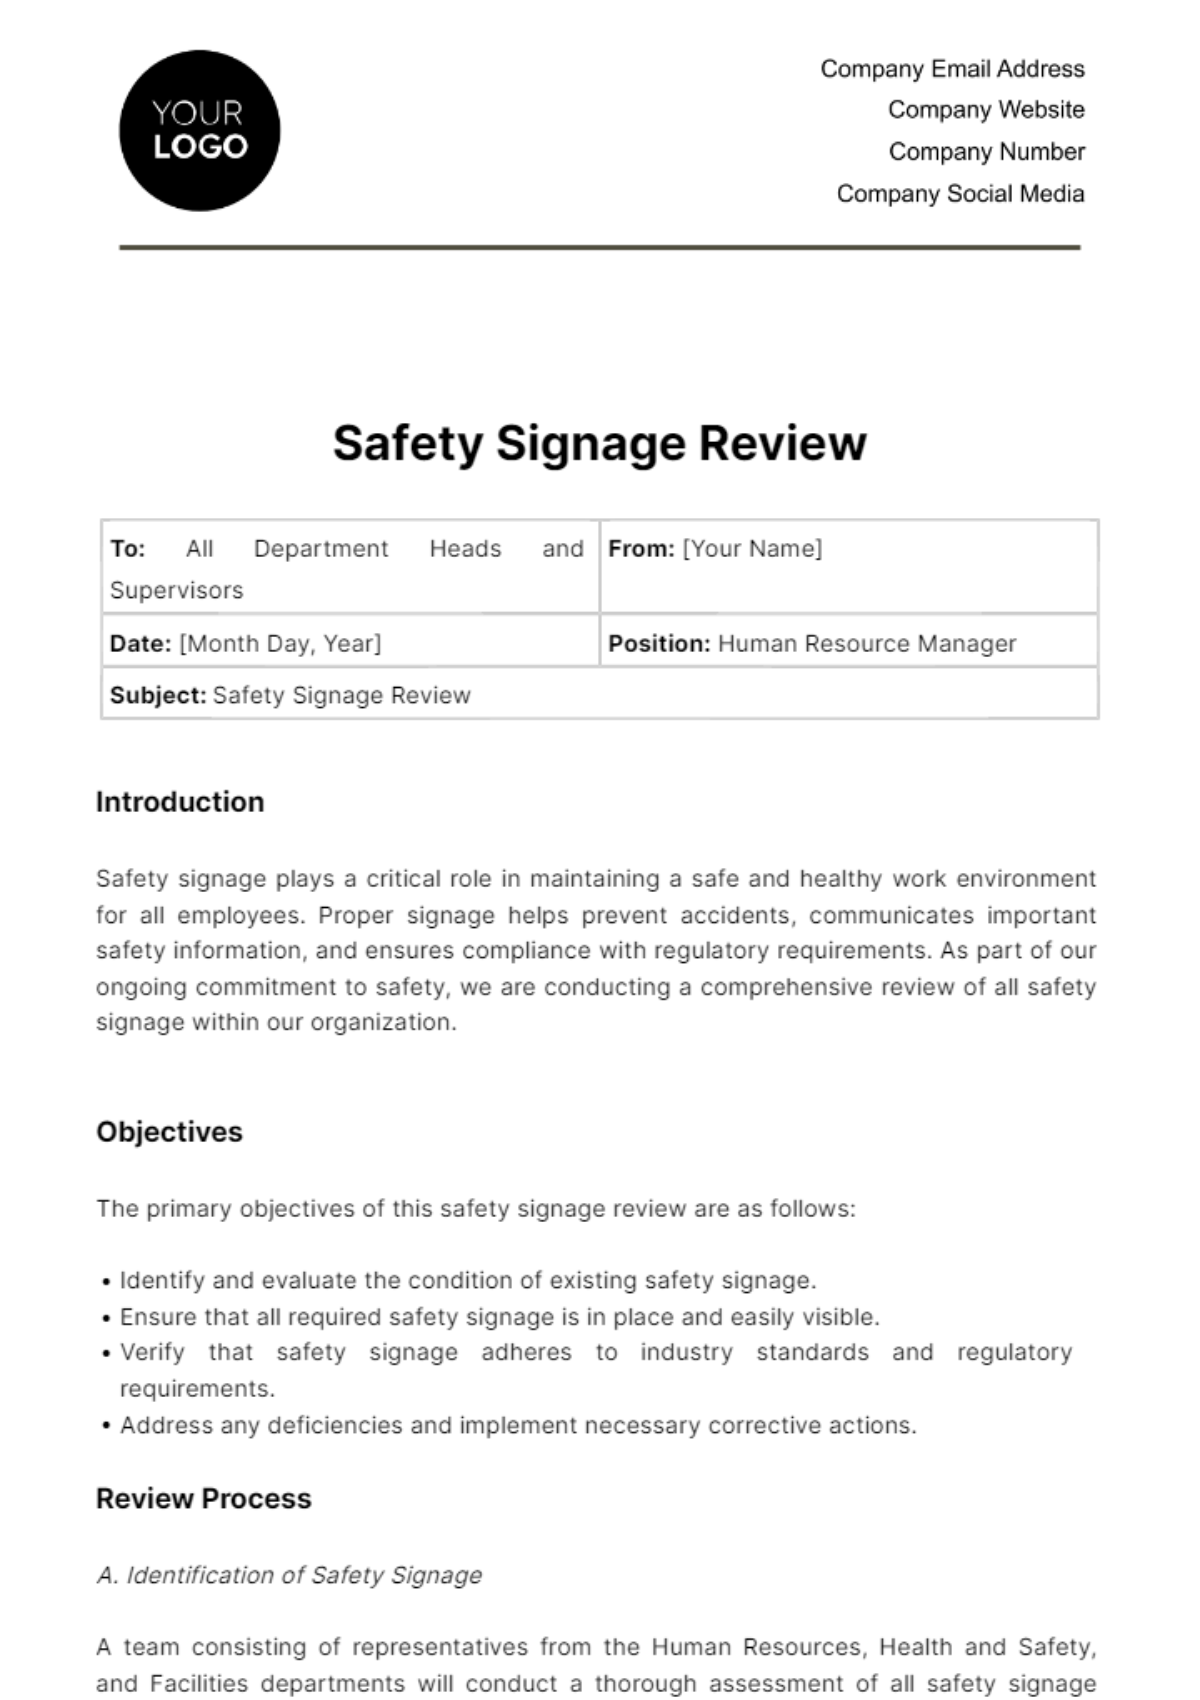 Safety Signage Review HR Template